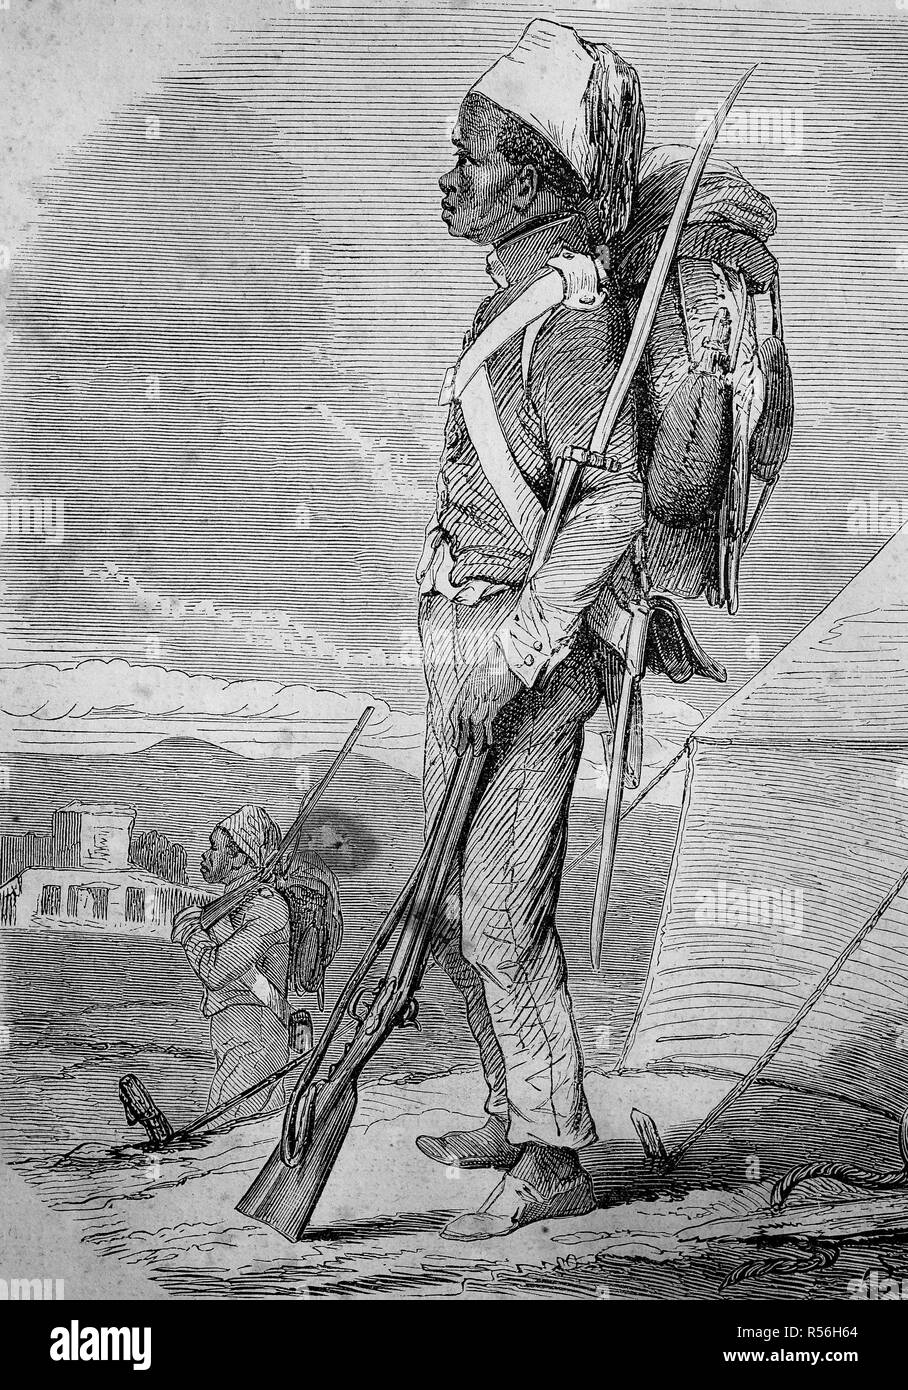 A Tunisian soldier with a backpack and a musket, 1855, woodcut, Tunisia Stock Photo